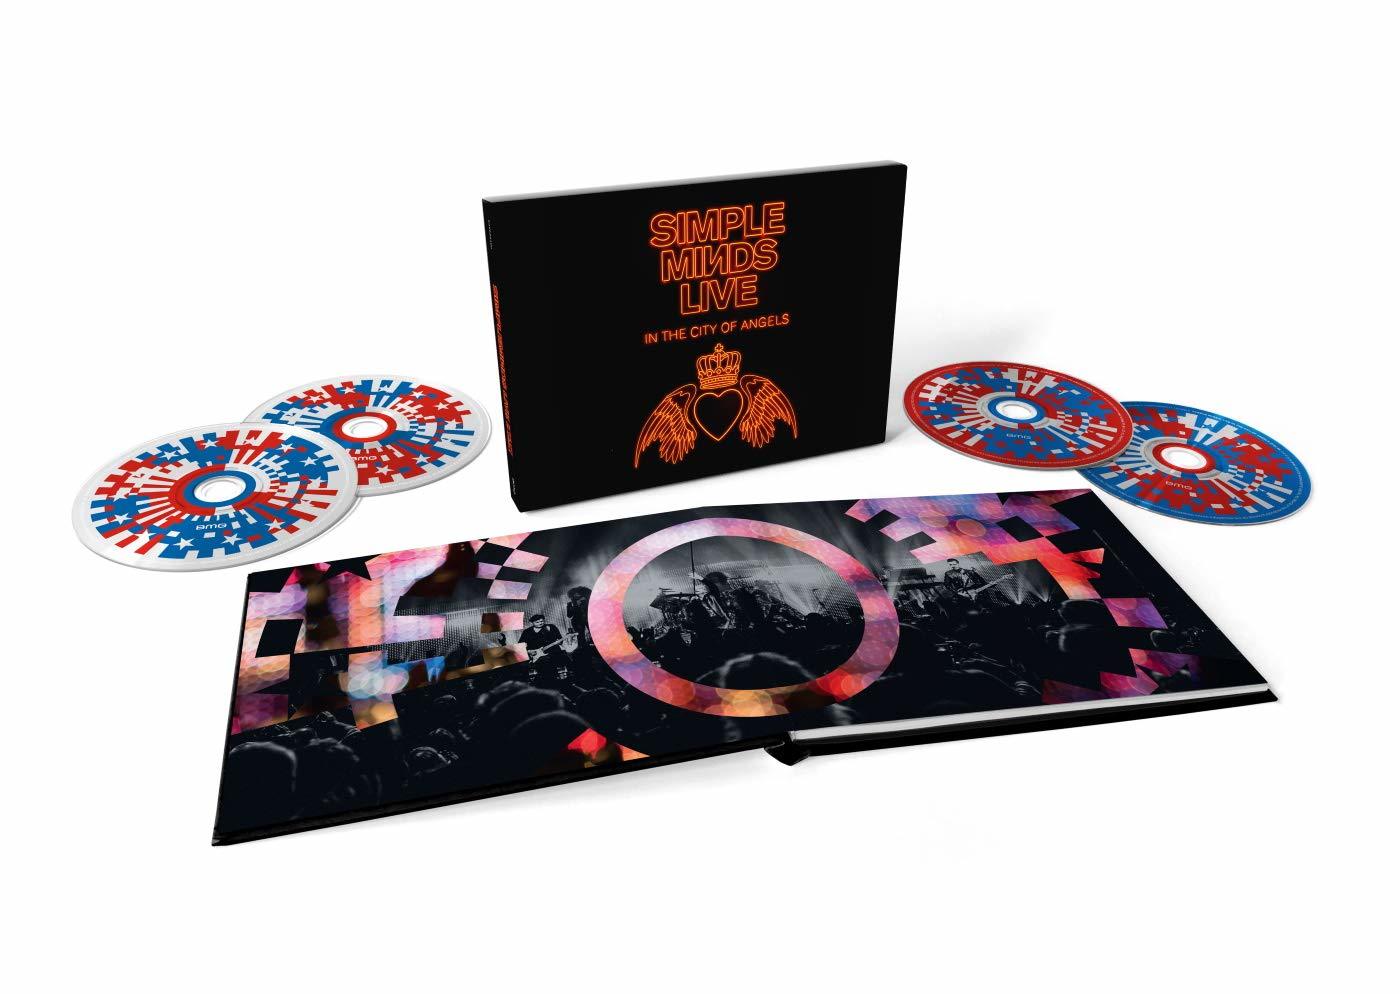 Simple Minds ‎Live In The City Of Angels DELUXE BOOK BOX SET with 4 x CD (UNIVERSAL)